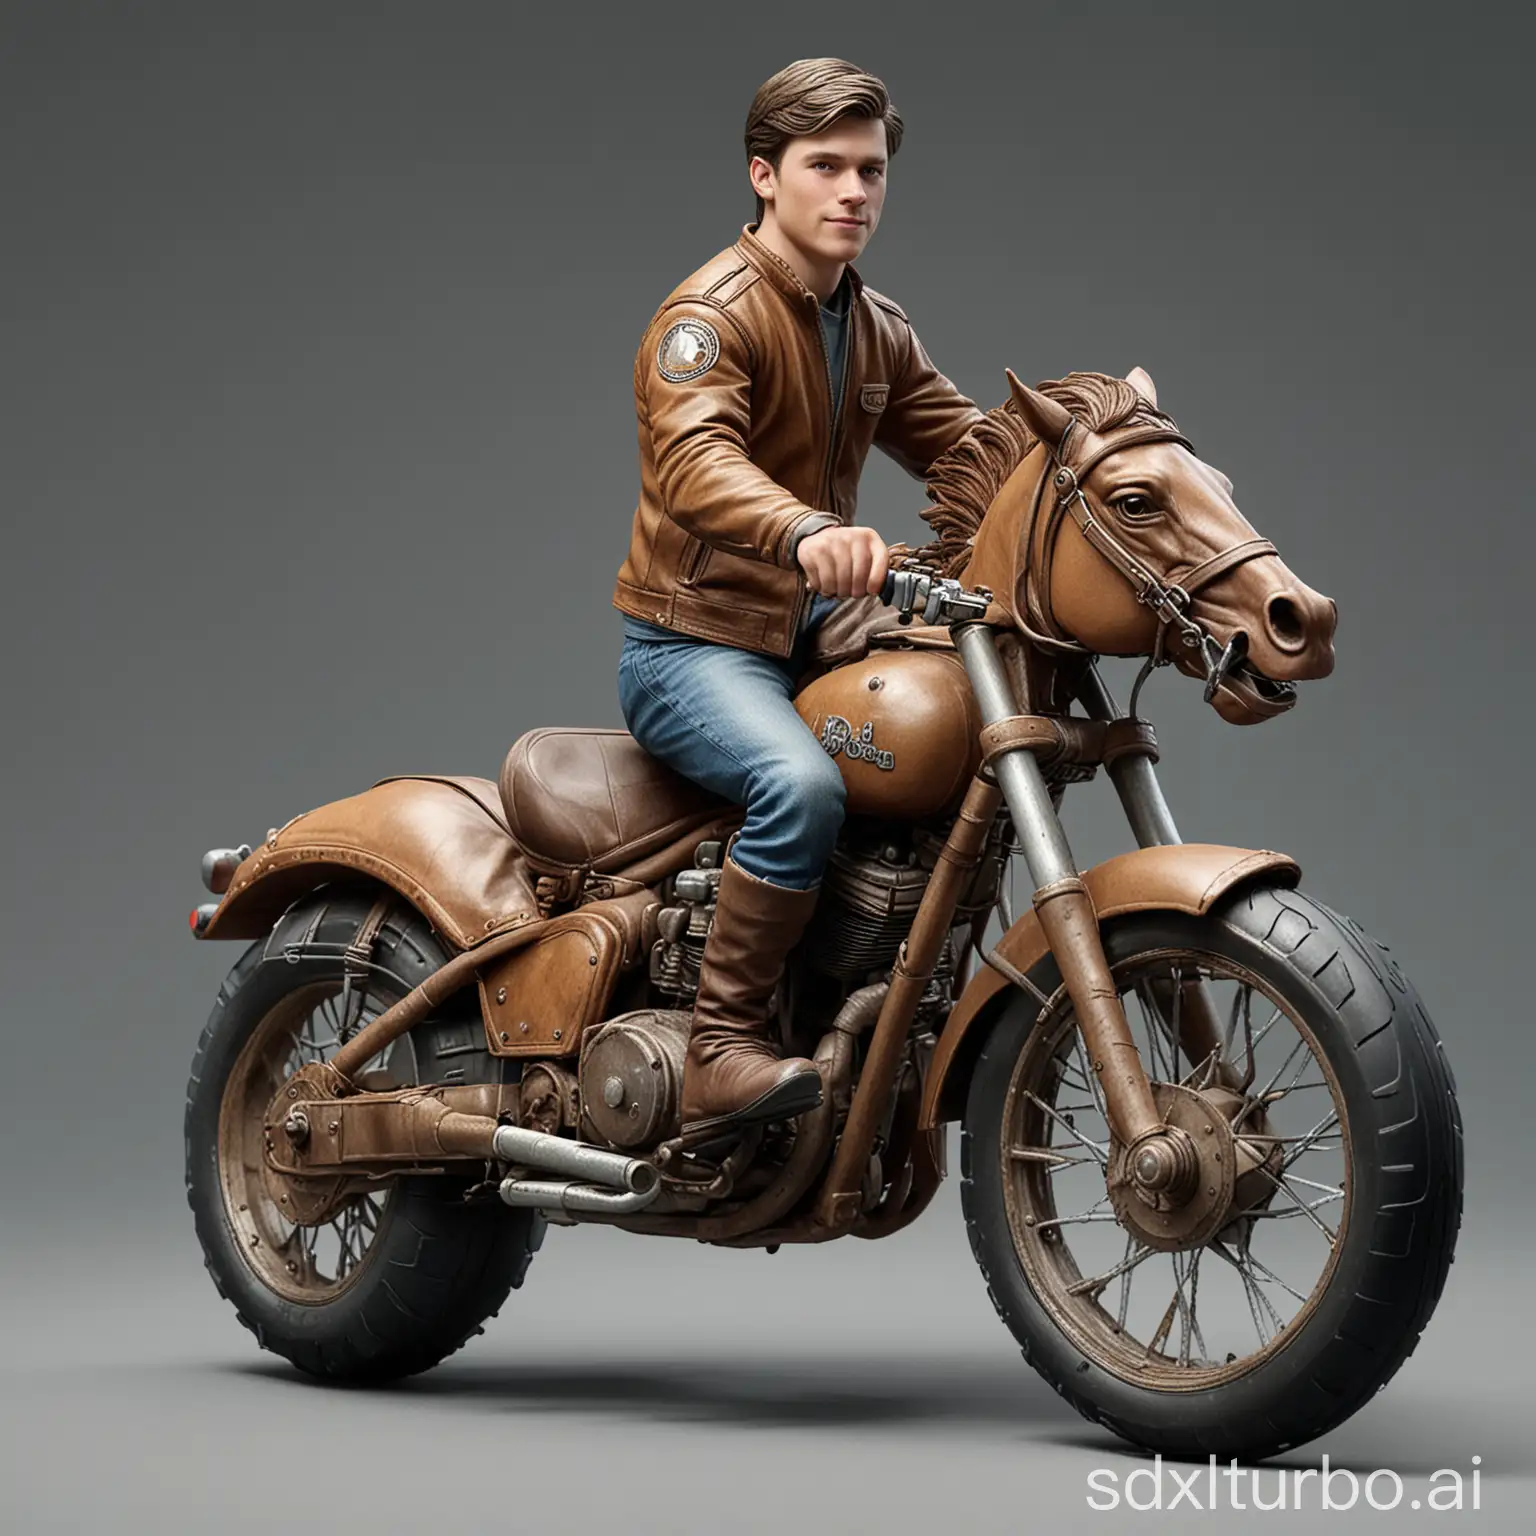 Wade, 18 years old, riding a motorcycle. The motorcycle is in the shape of a horse, and the shape of the picture is realistic and very real. It remains at the same quality. The picture quality is printed 8k.